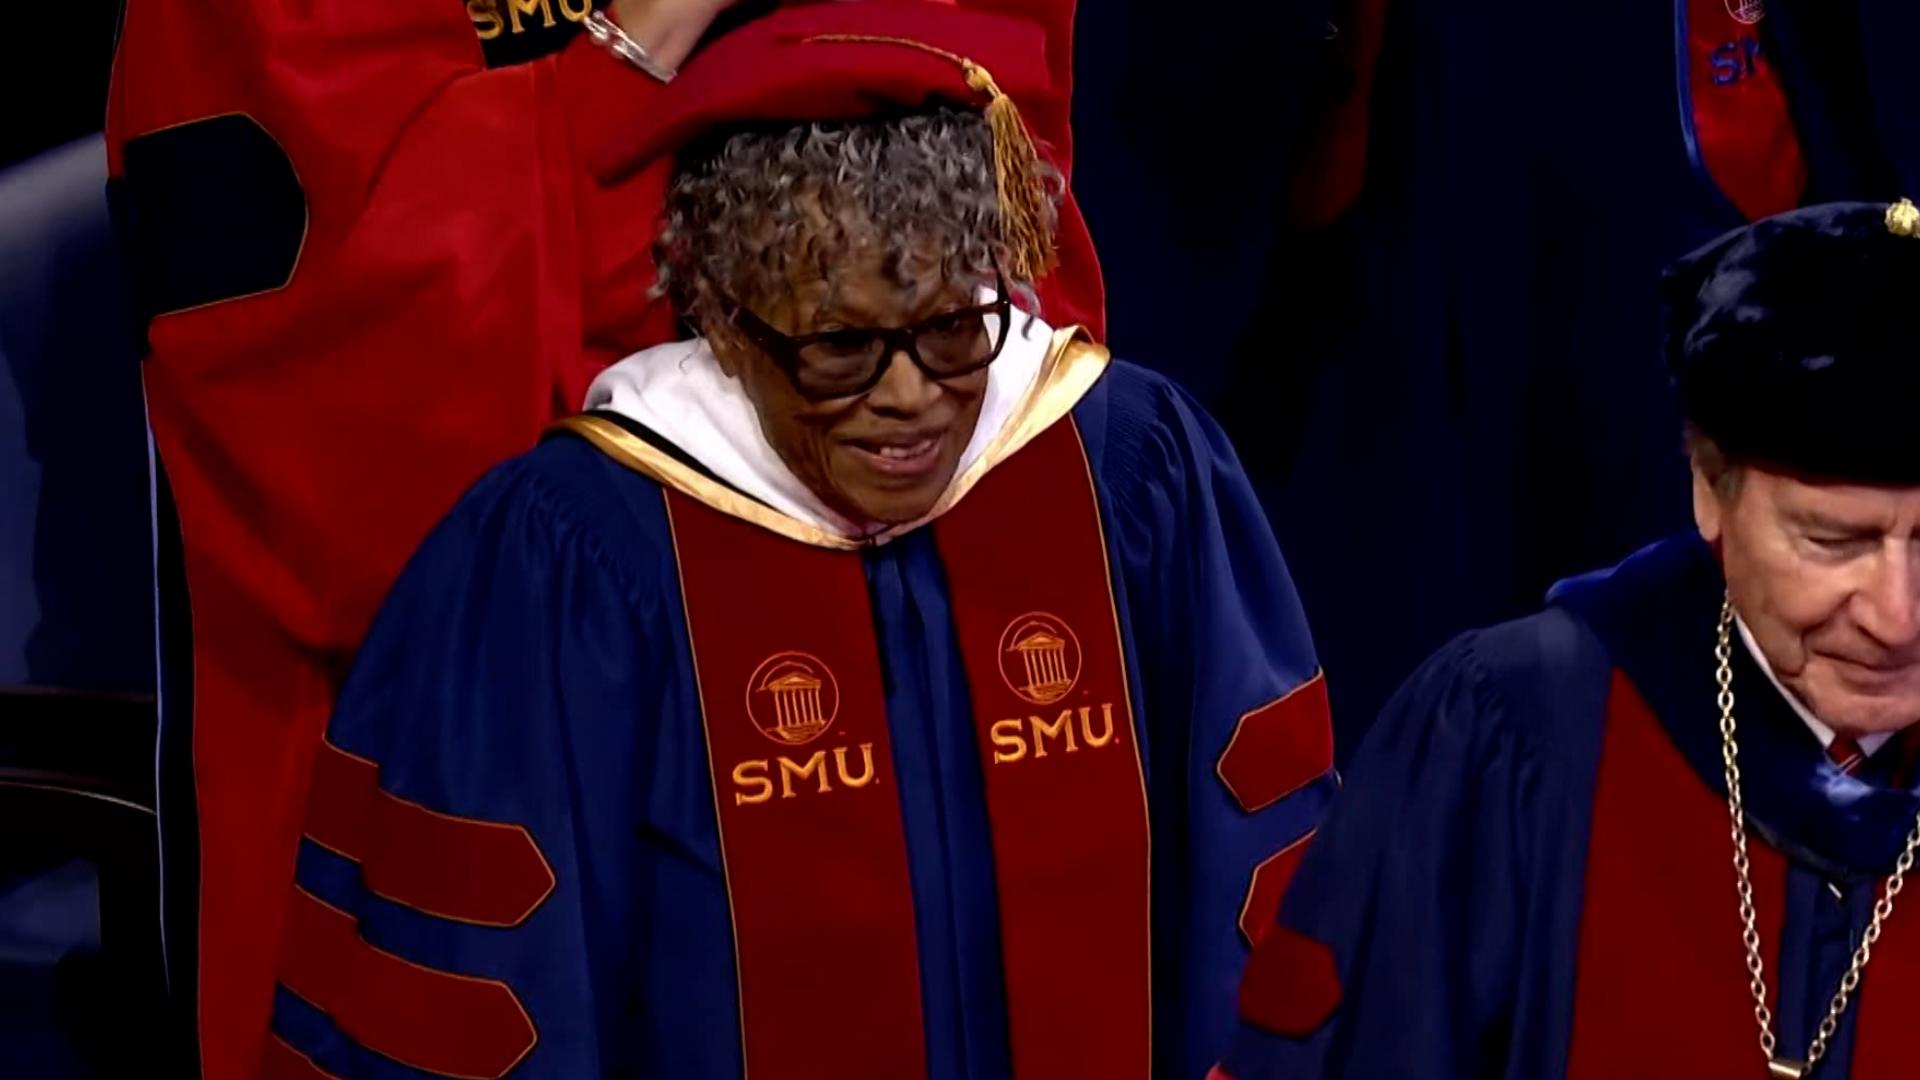 Civil rights icon Opal Lee received an honorary Doctor of Humane Letters degree from SMU at the university’s May 11 commencement ceremony.